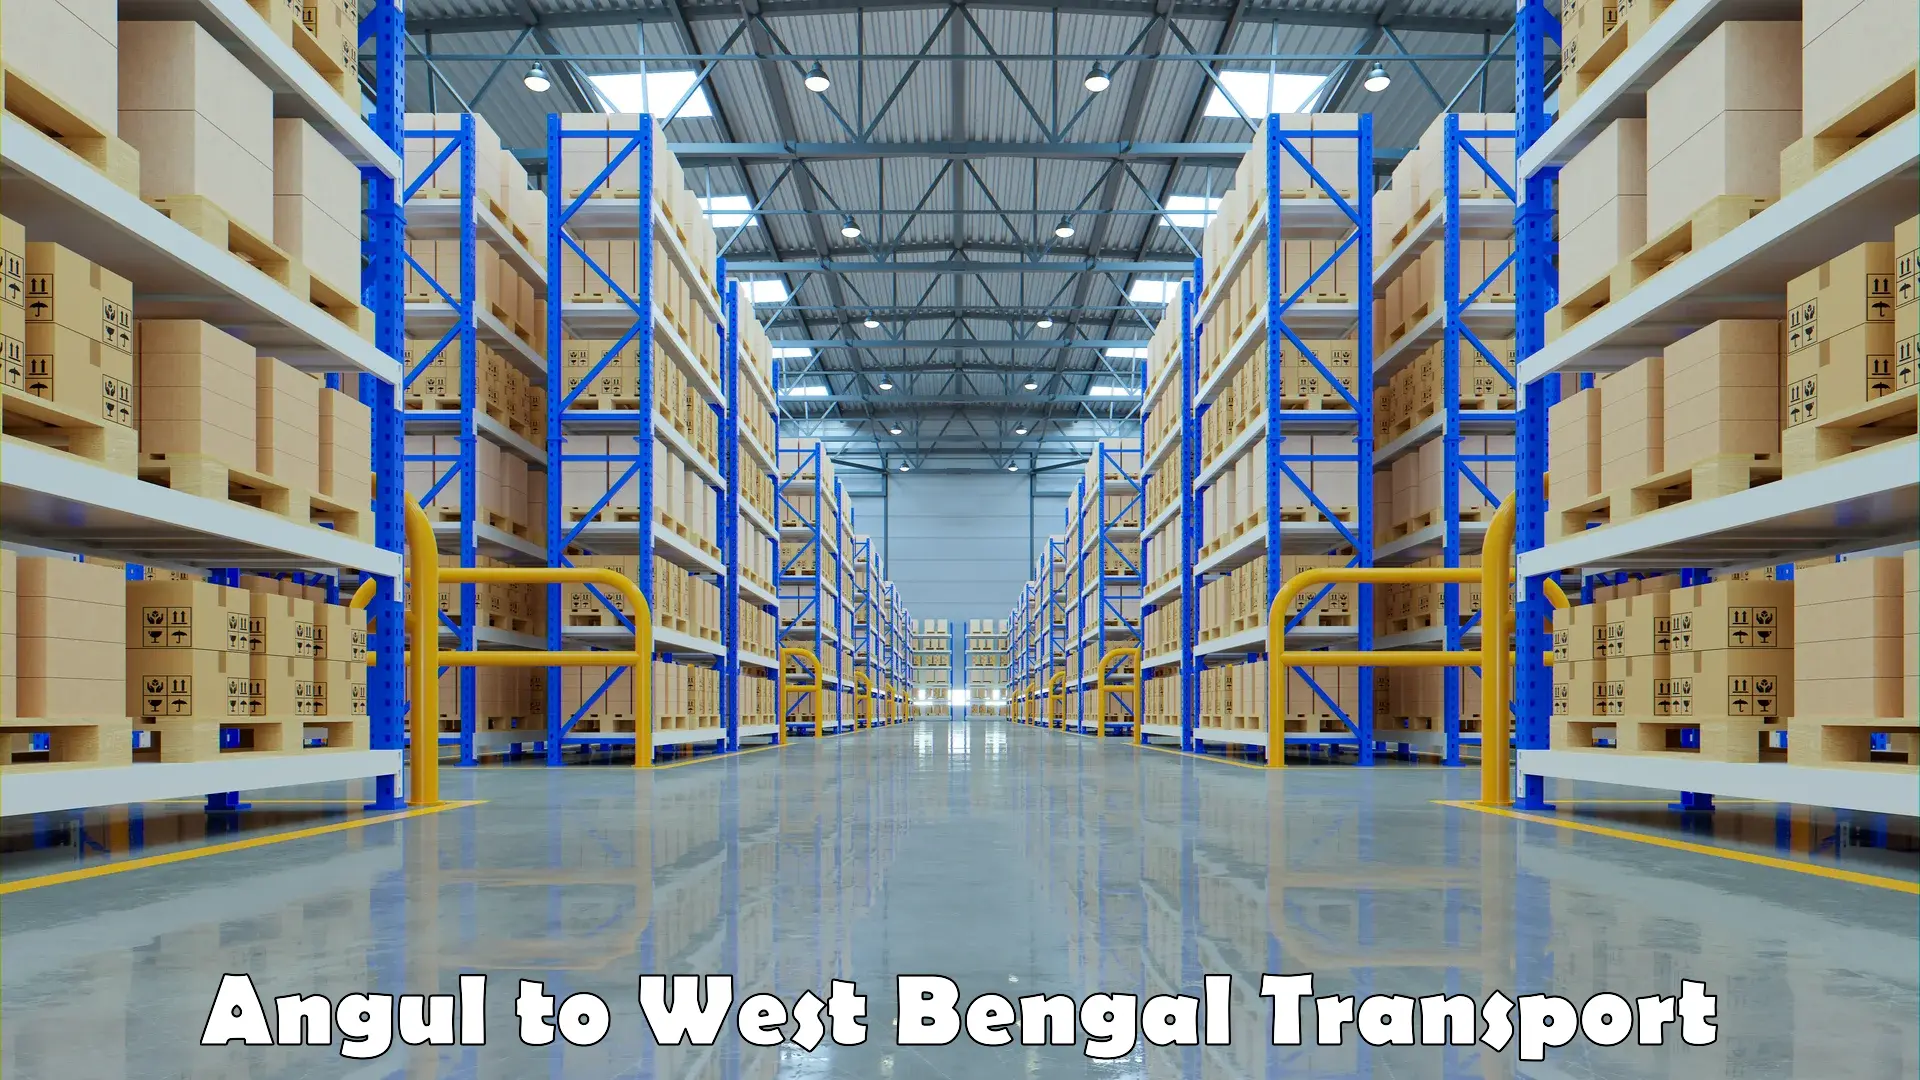 Nearest transport service Angul to West Bengal